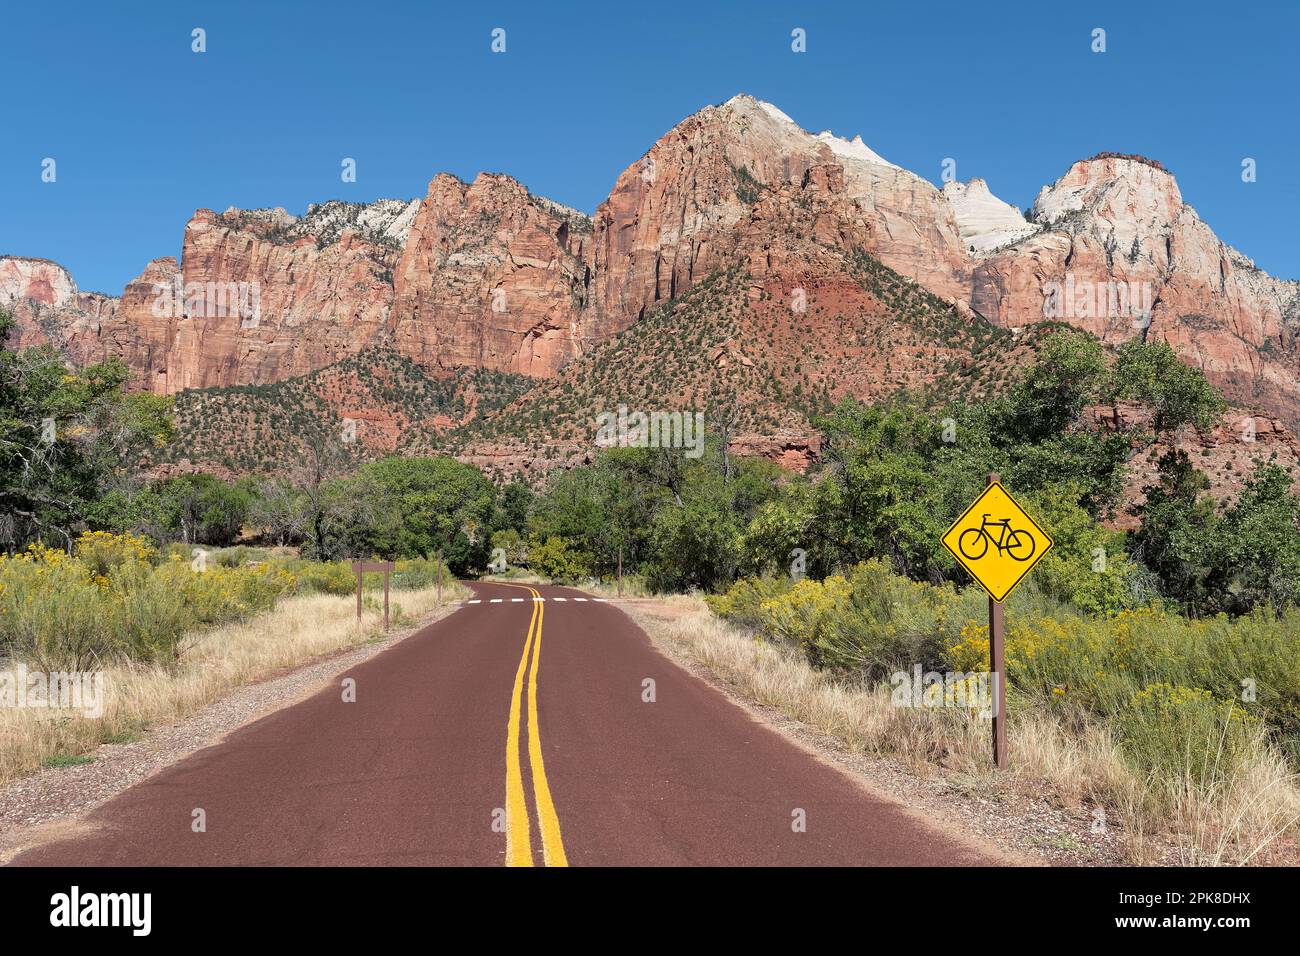 Zion Canyon park road winding through lush vegetation with Cottonwood trees at the foot of steep Navajo Sandstone cliffs towering over the valley Stock Photo